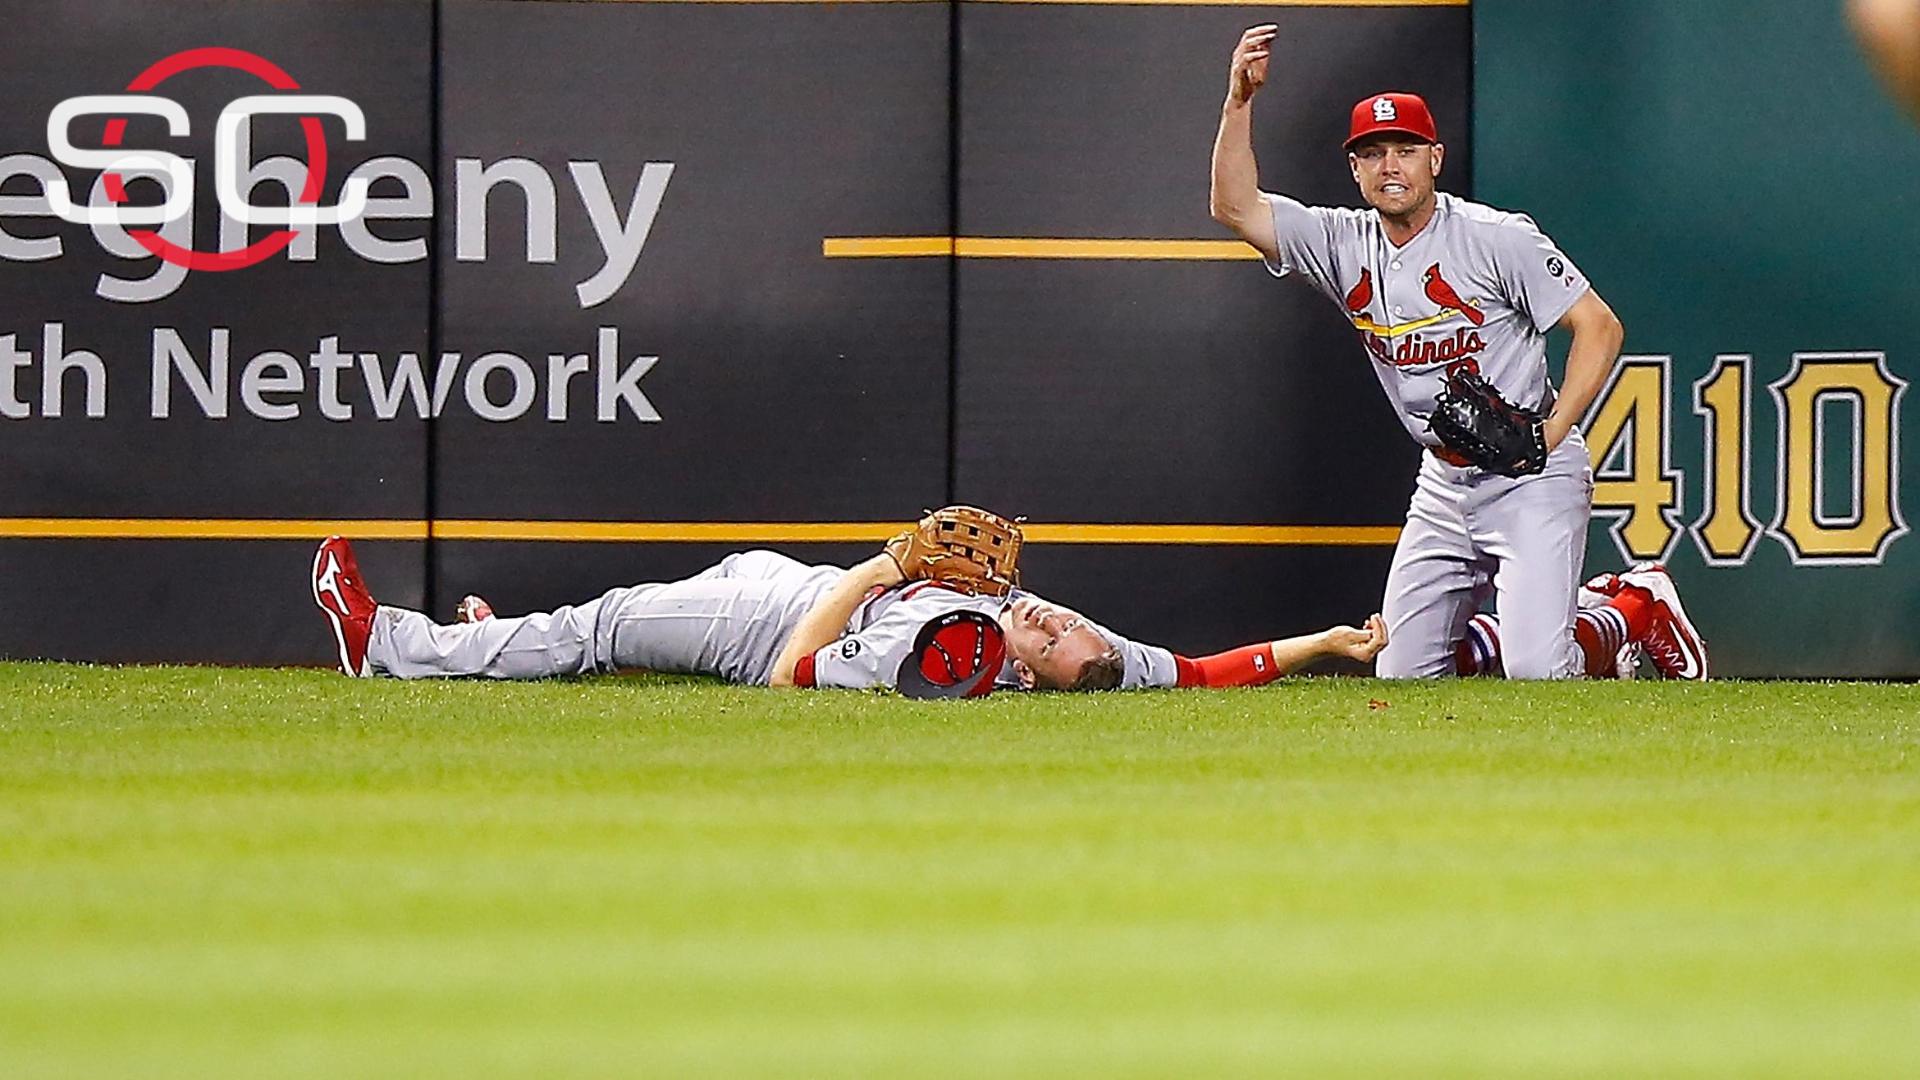 Cardinals OF Stephen Piscotty suffers bruised head in collision - 6abc  Philadelphia